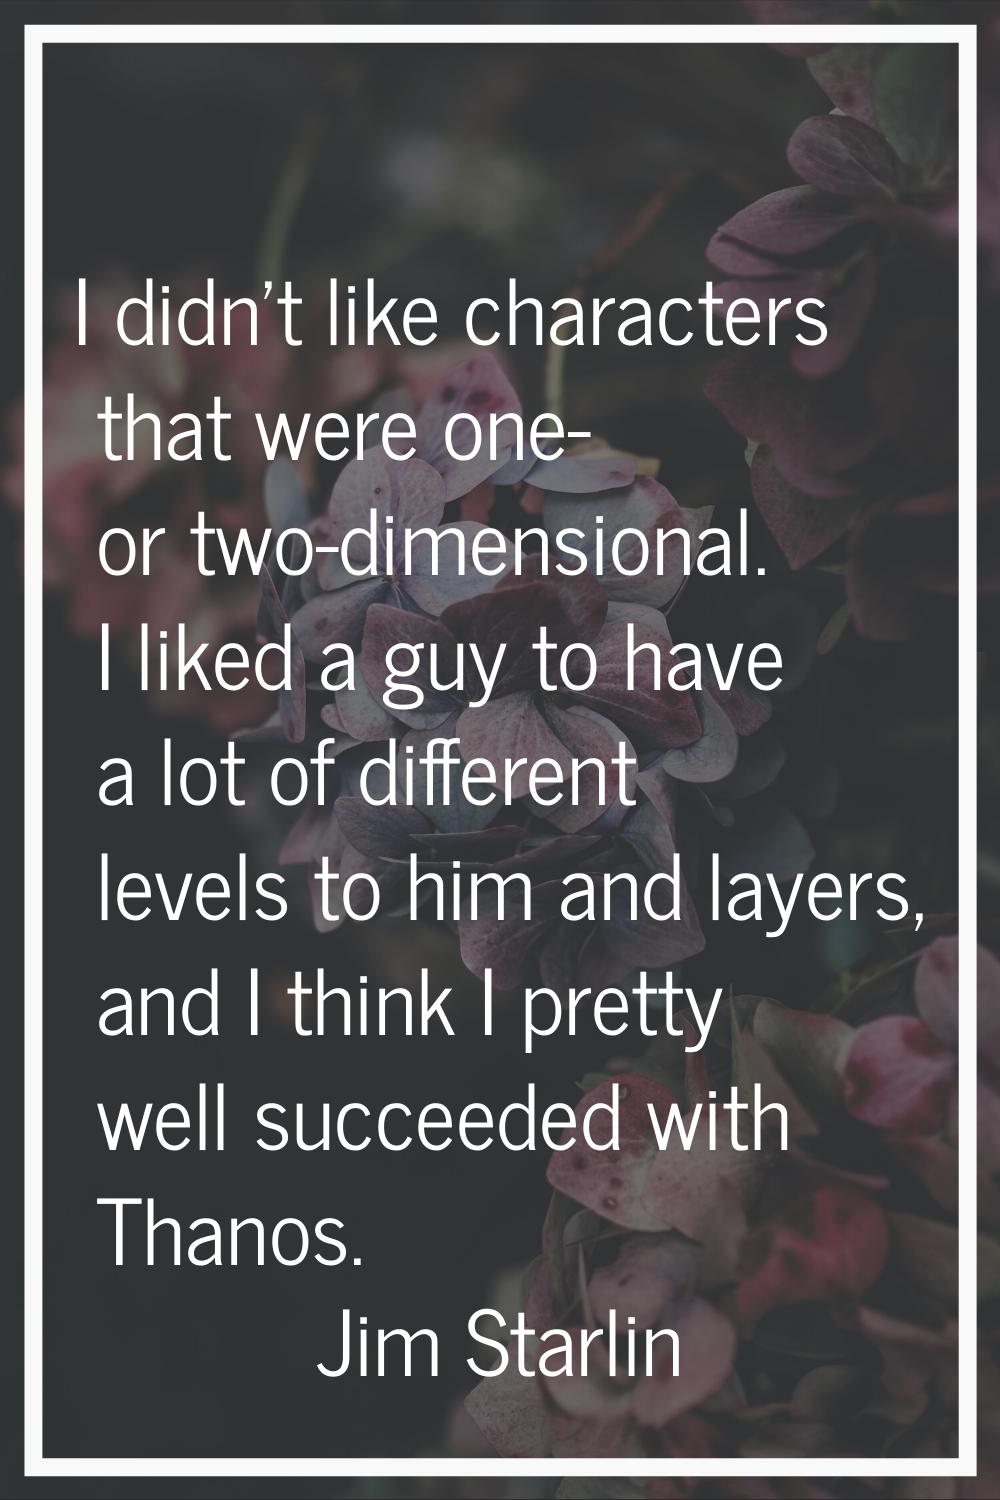 I didn't like characters that were one- or two-dimensional. I liked a guy to have a lot of differen